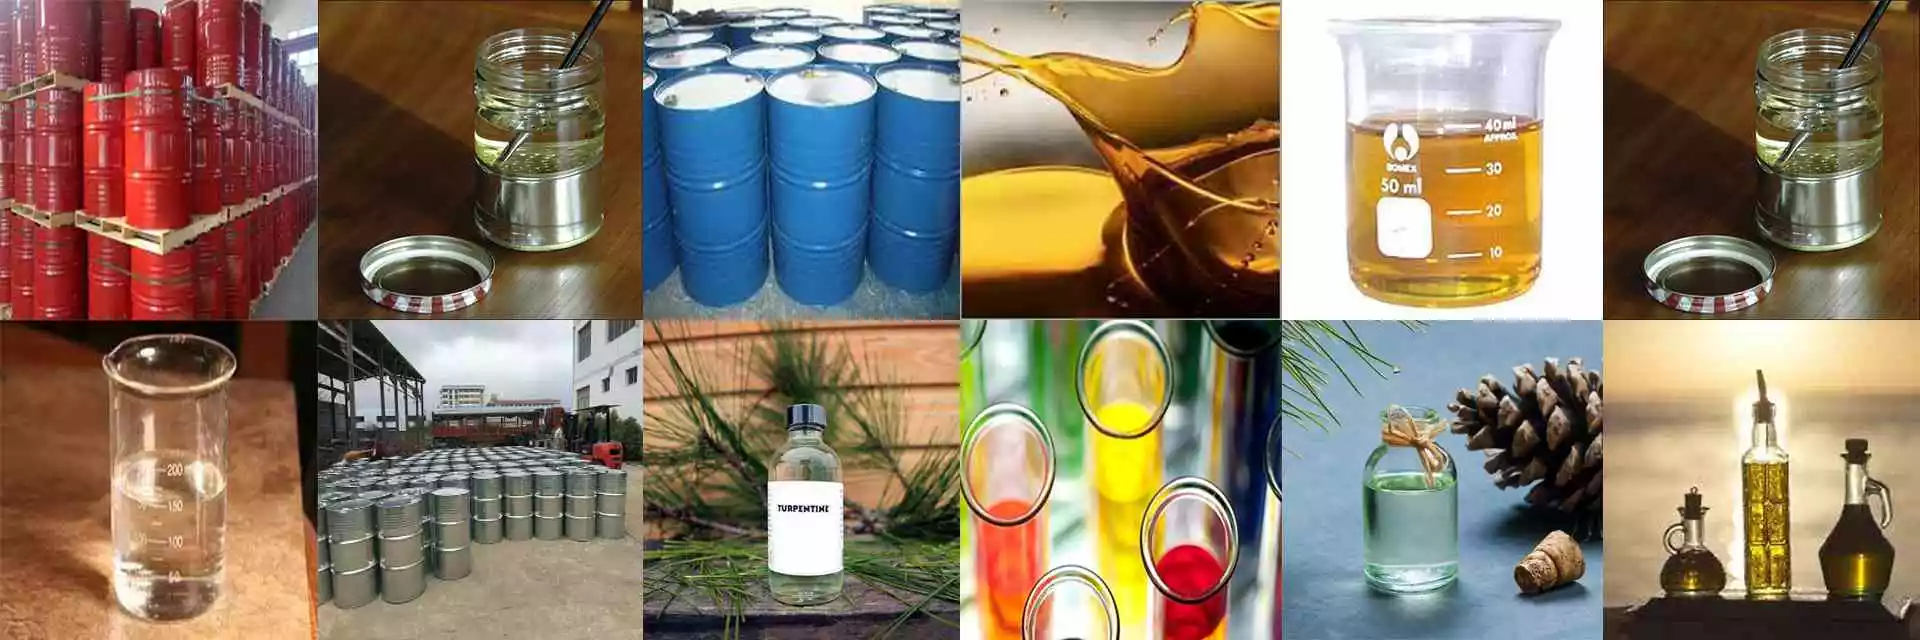 Solvent Naphtha Dealers in india